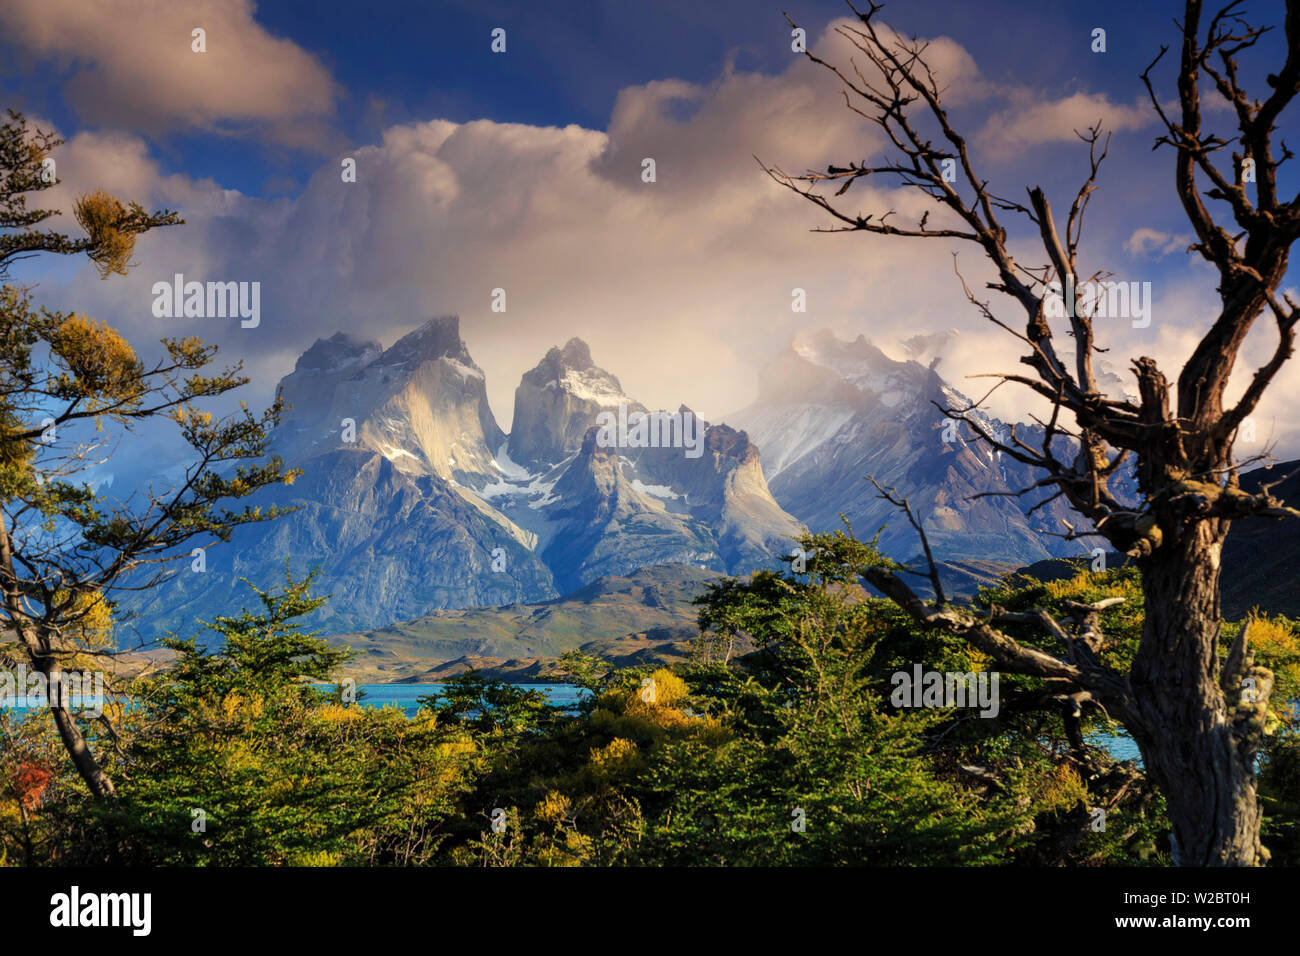 Chile, Patagonia, Torres del Paine National Park (UNESCO Site), Cuernos del Paine peaks and Lake Pehoe Stock Photo